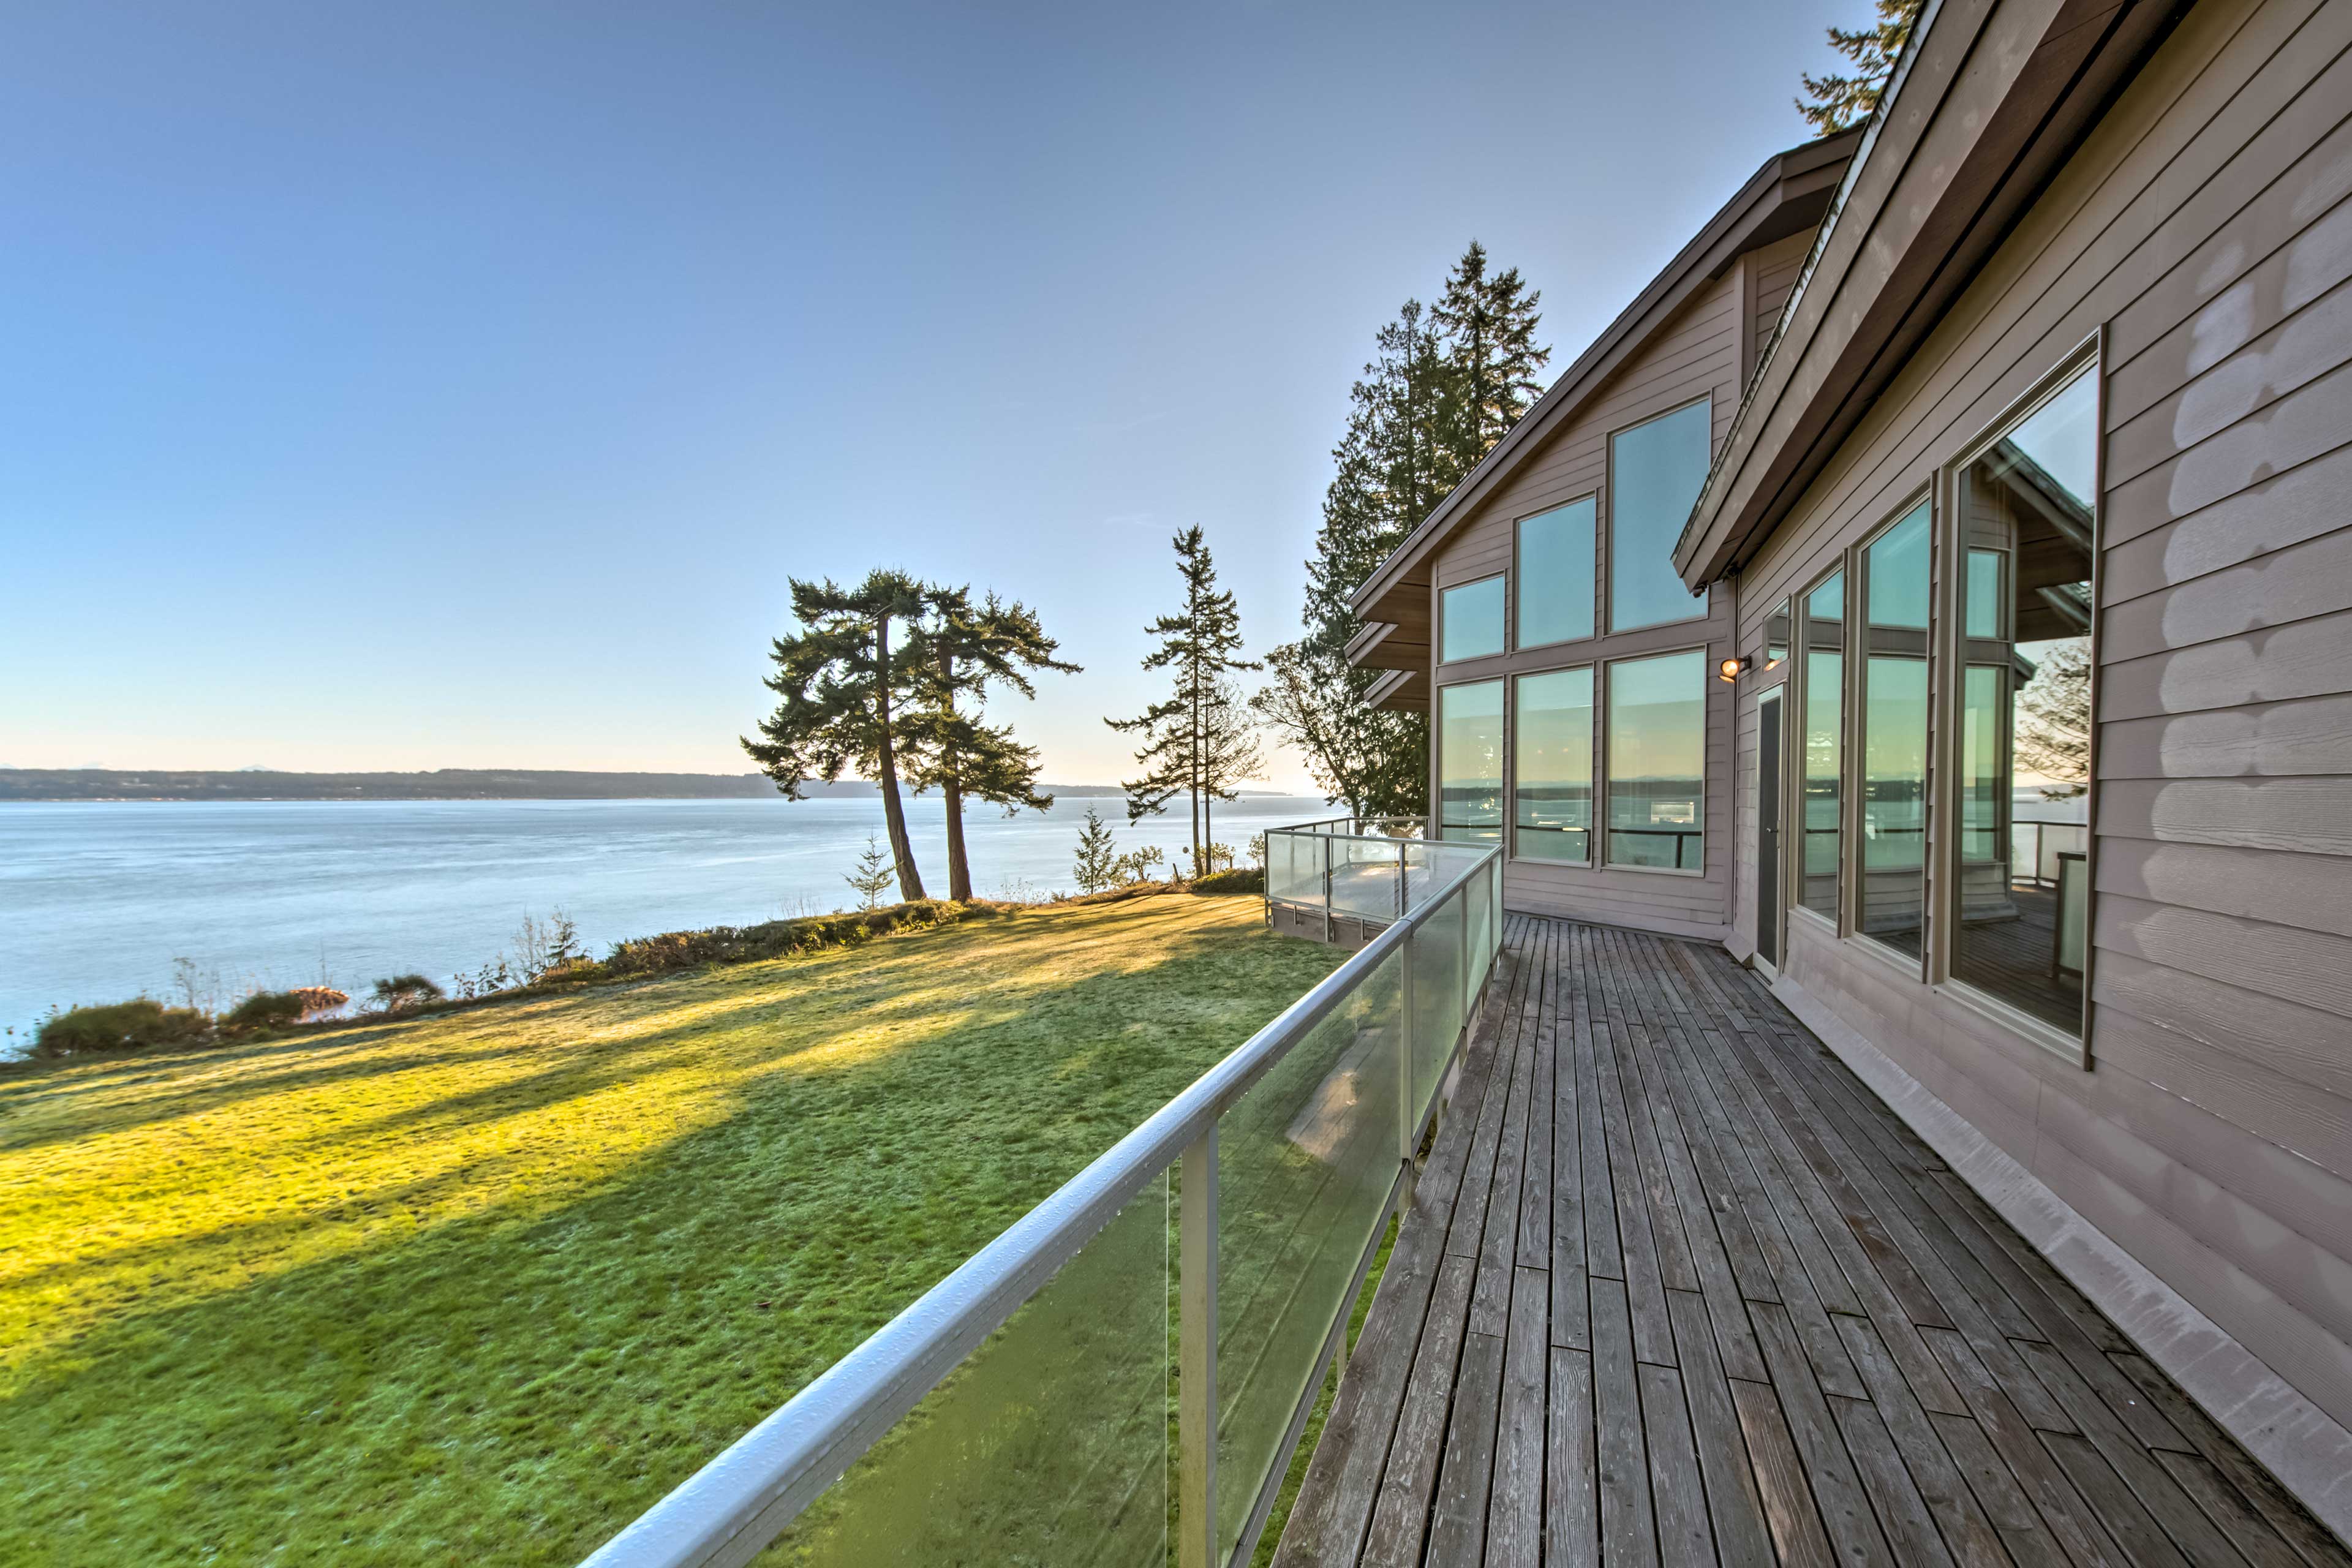 Property Image 2 - Marrowstone Island Home: 20 Mins to Port Townsend!